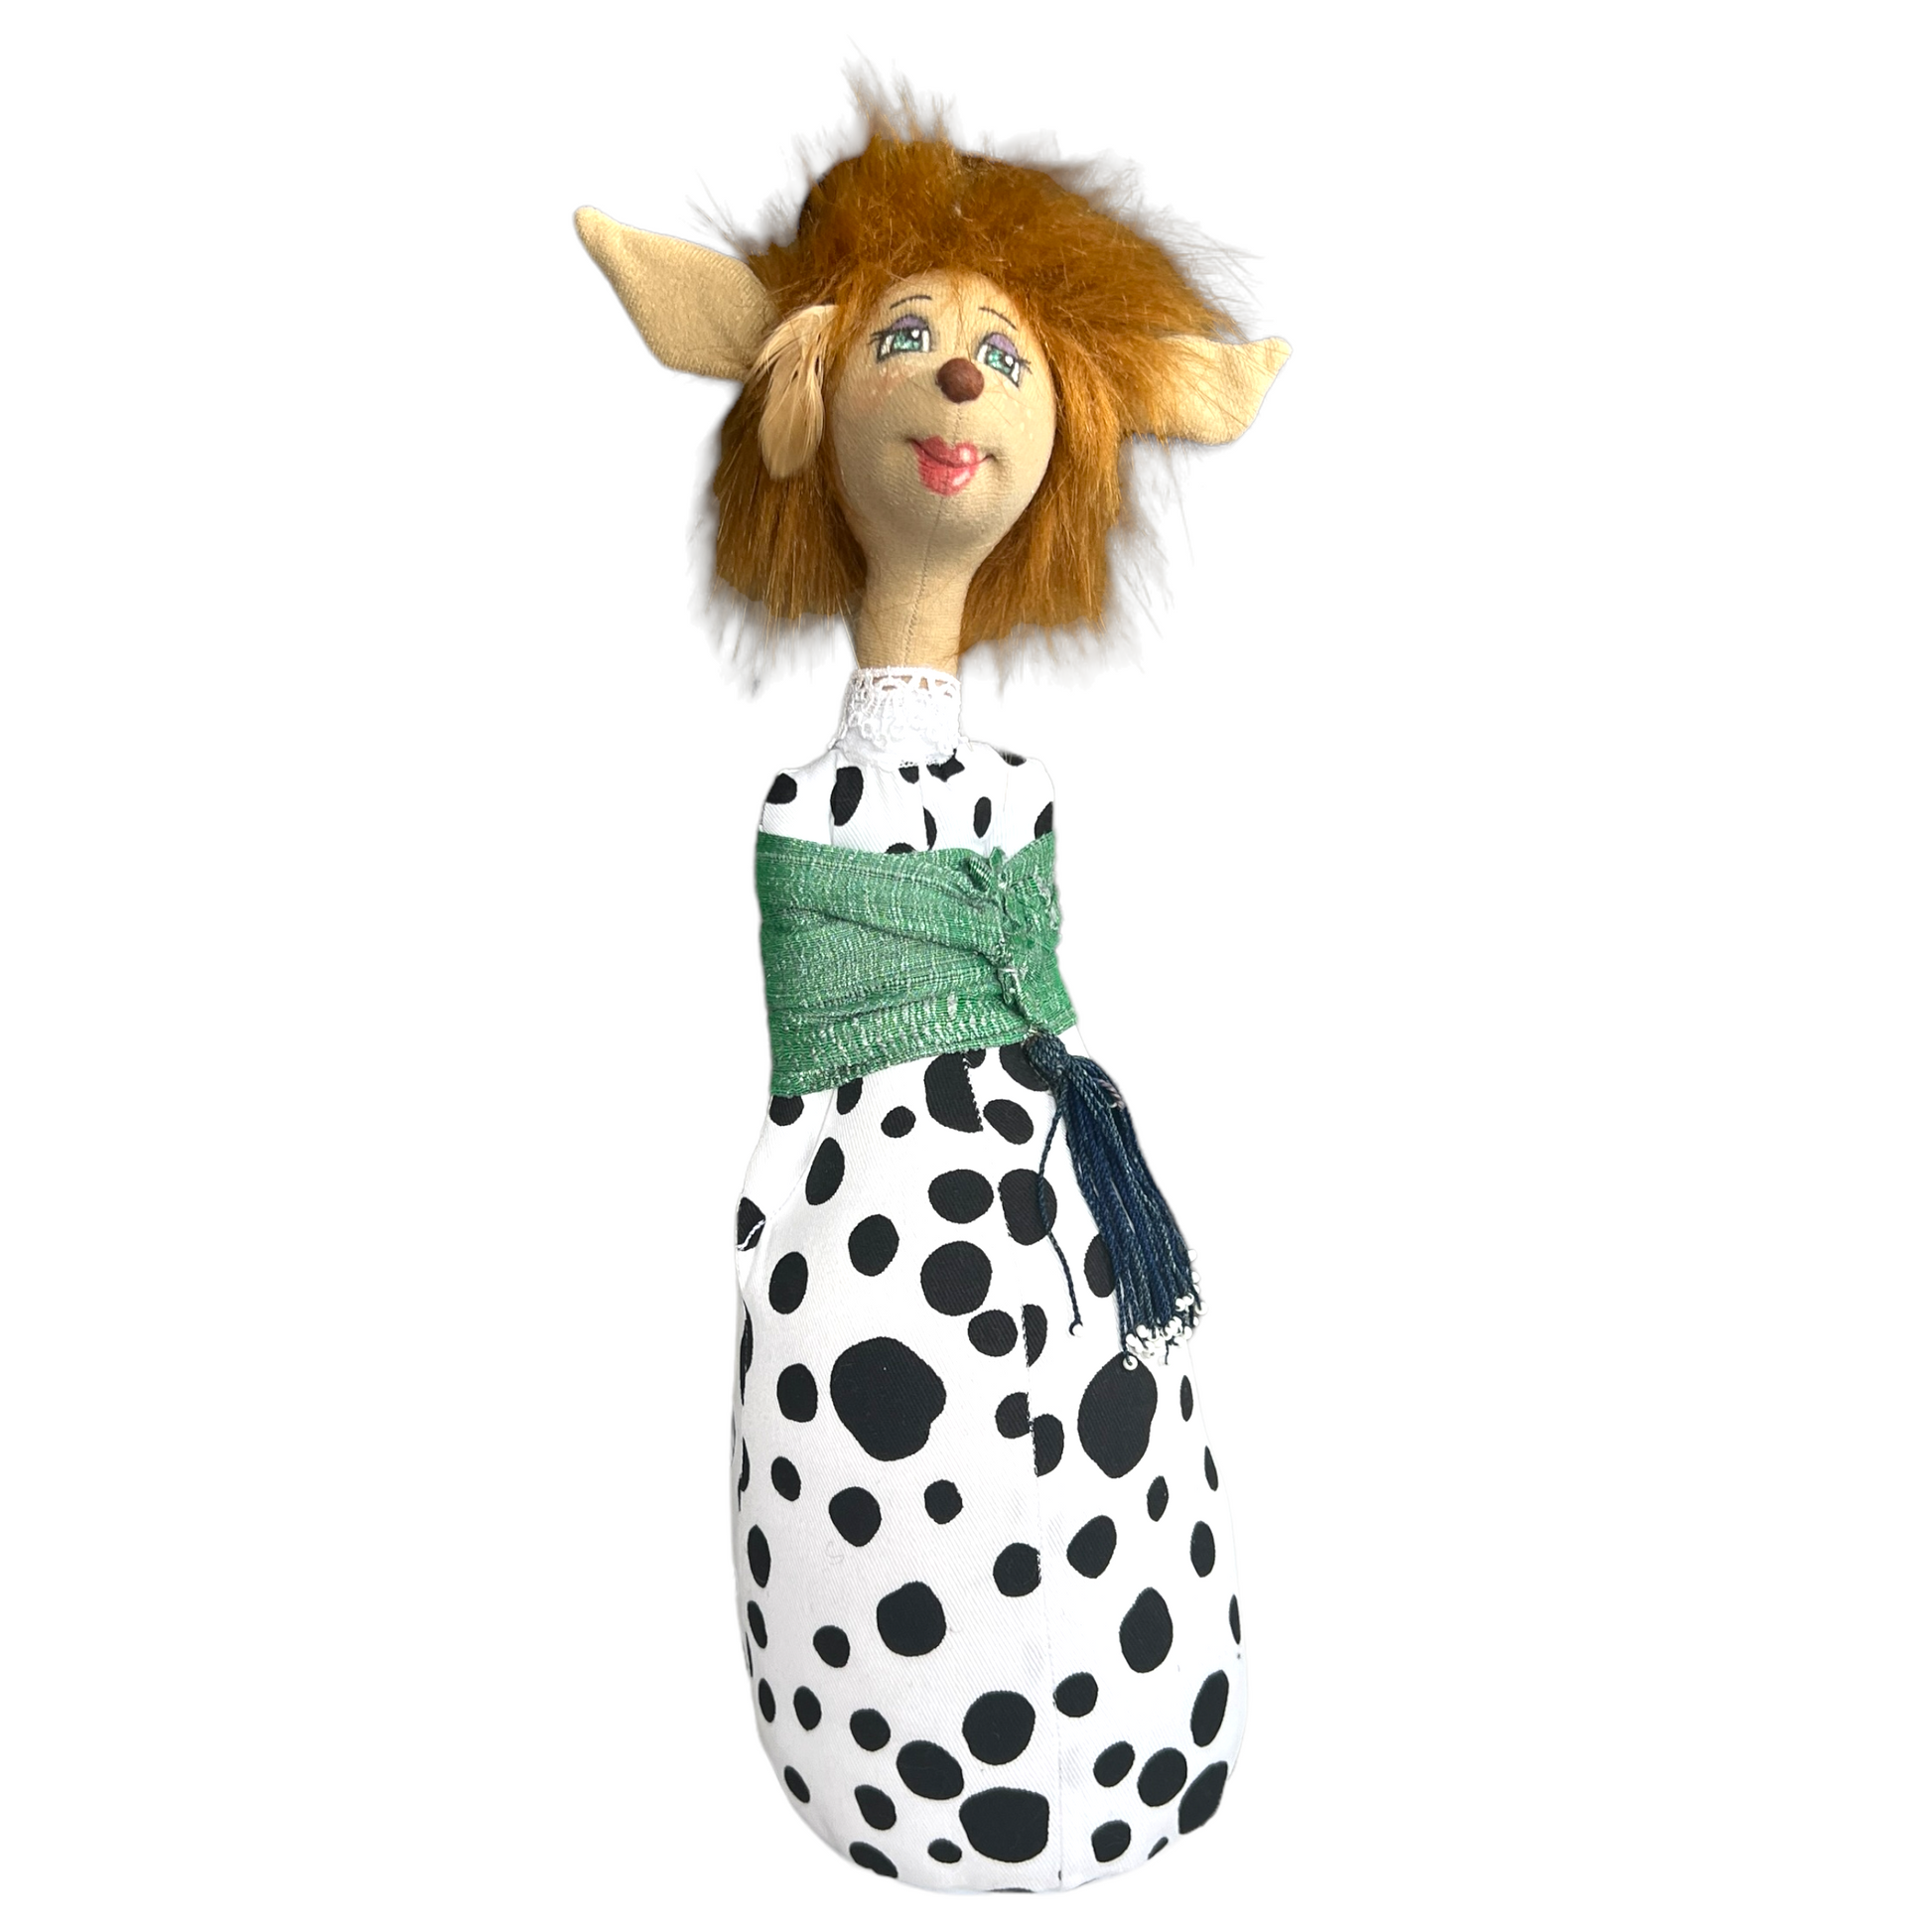 Fawn Doll, Stand Tall CHRISTMAS  Splash Quilting Polka Dot Dress with Green Jacket  